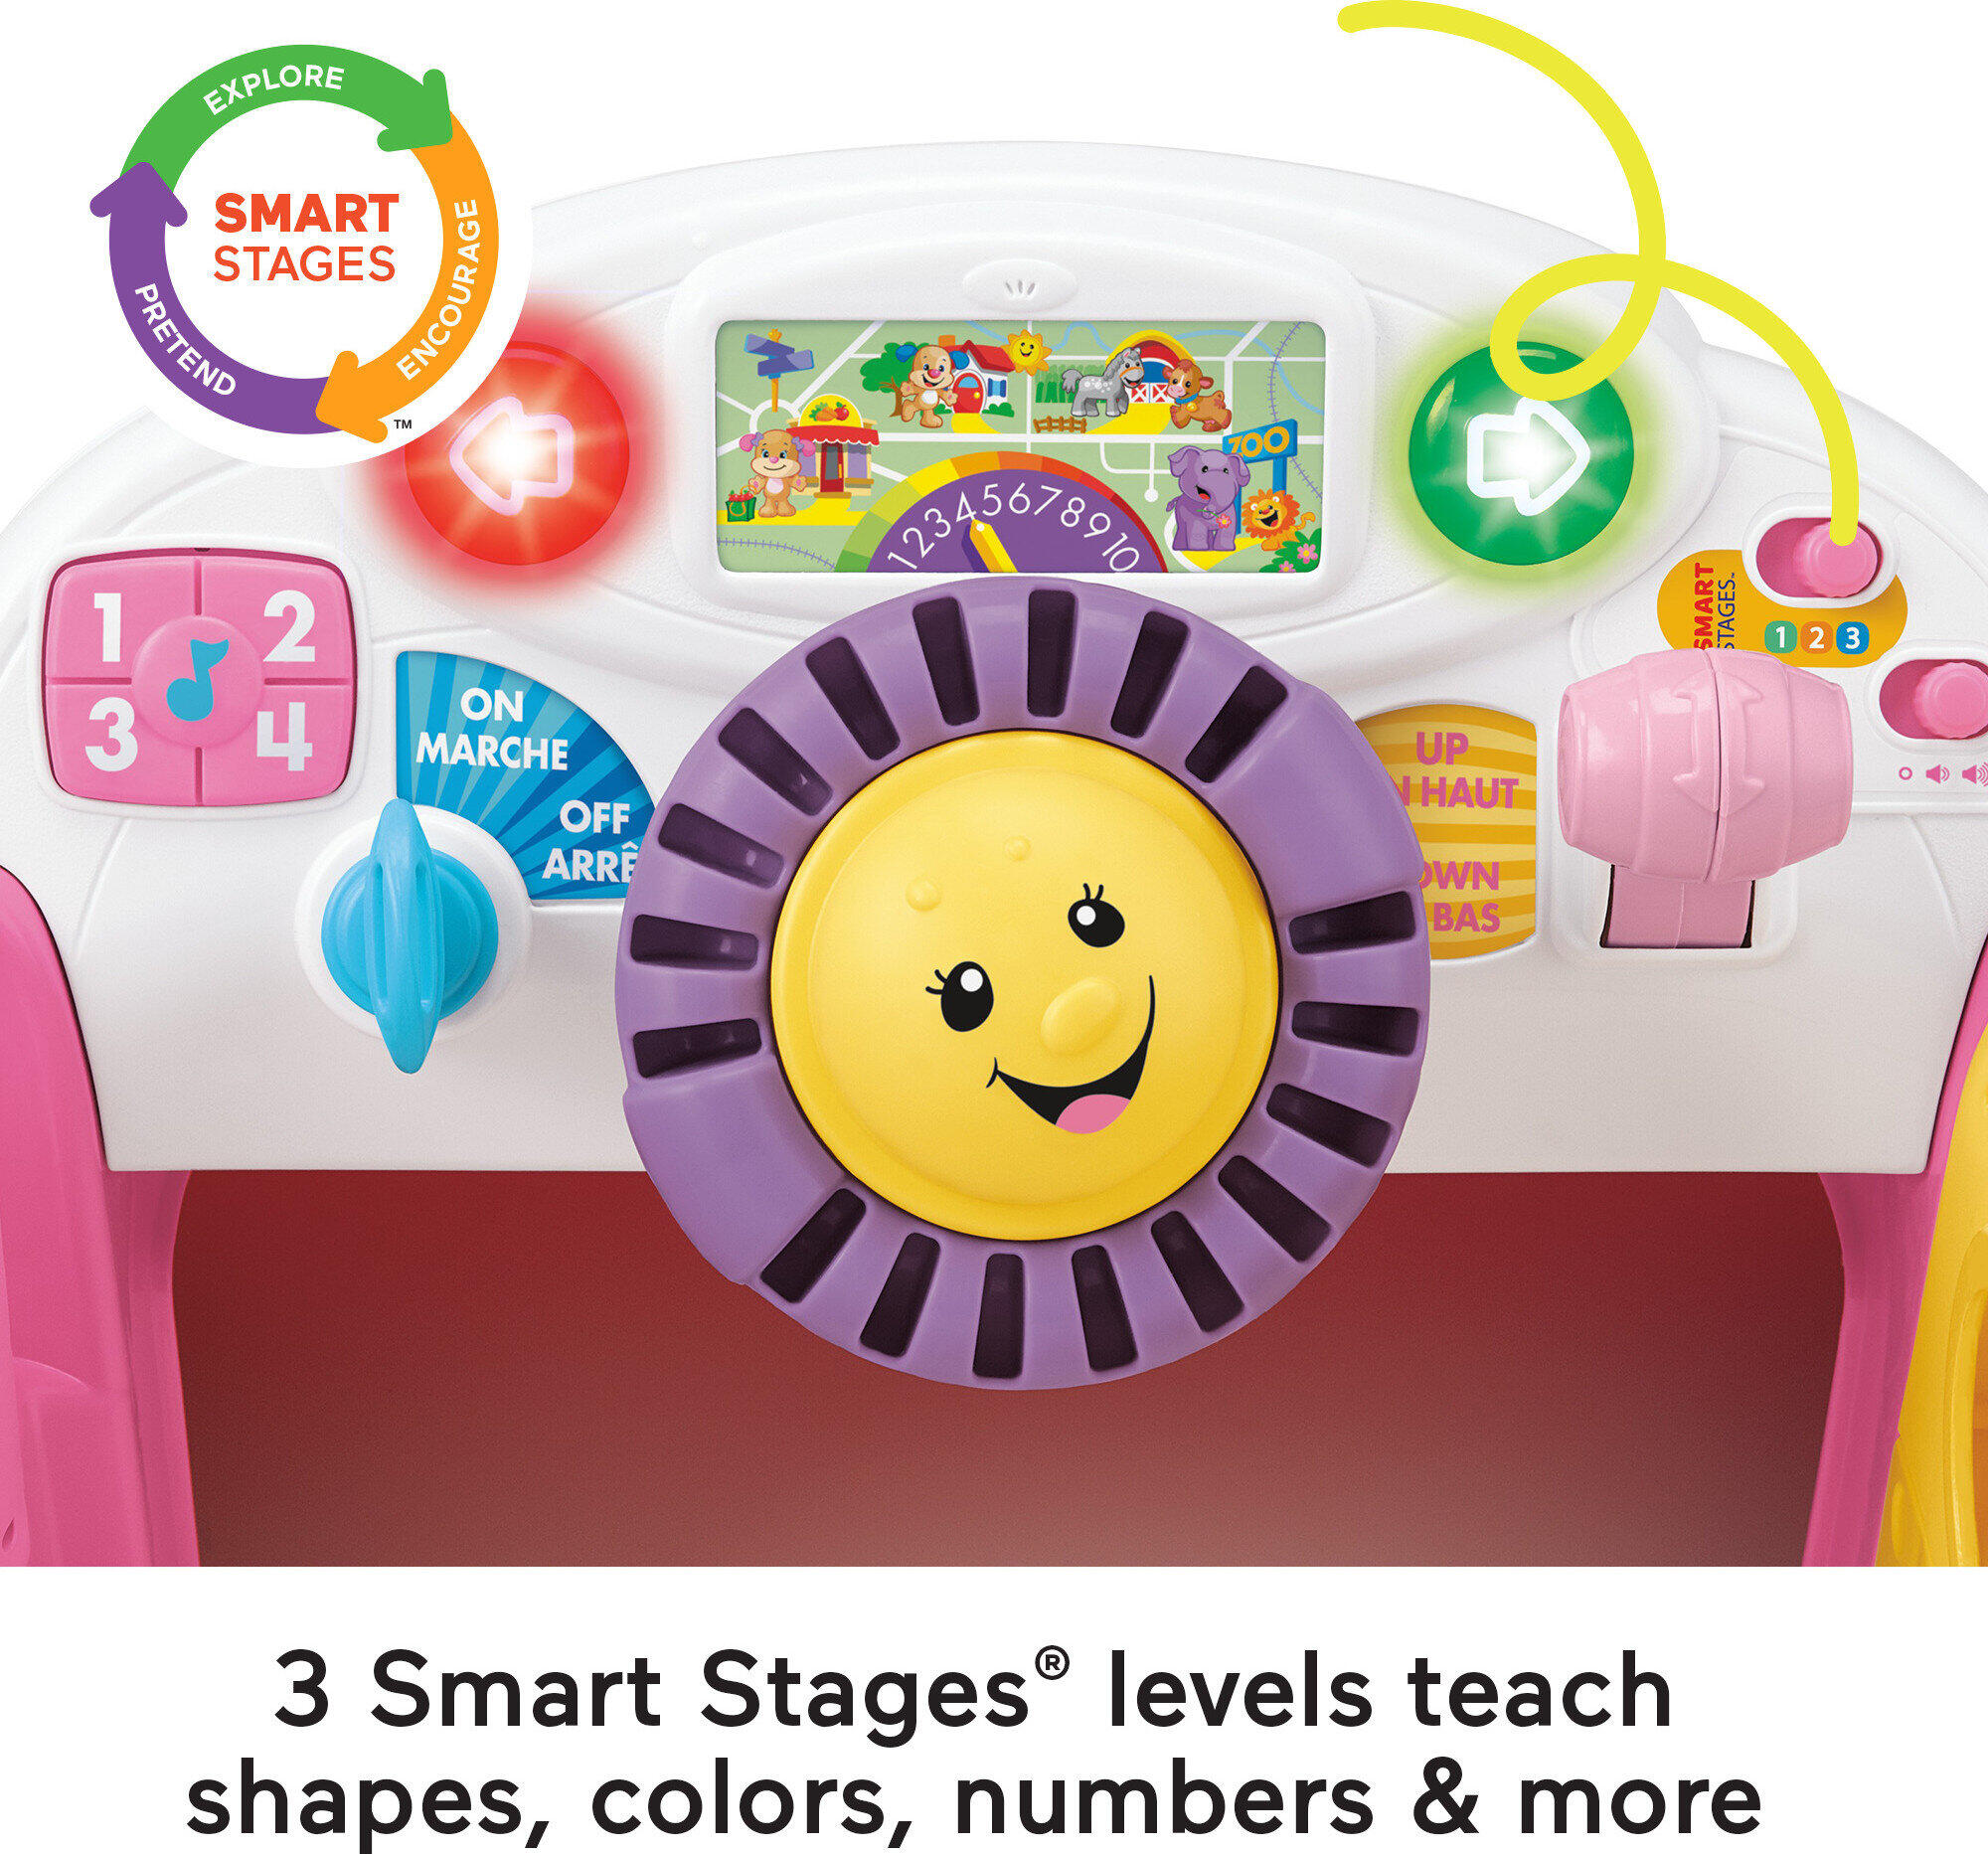 Fisher-Price Laugh & Learn Crawl Around Car, Electronic Learning Toy Activity Center for Baby, Pink - image 4 of 7